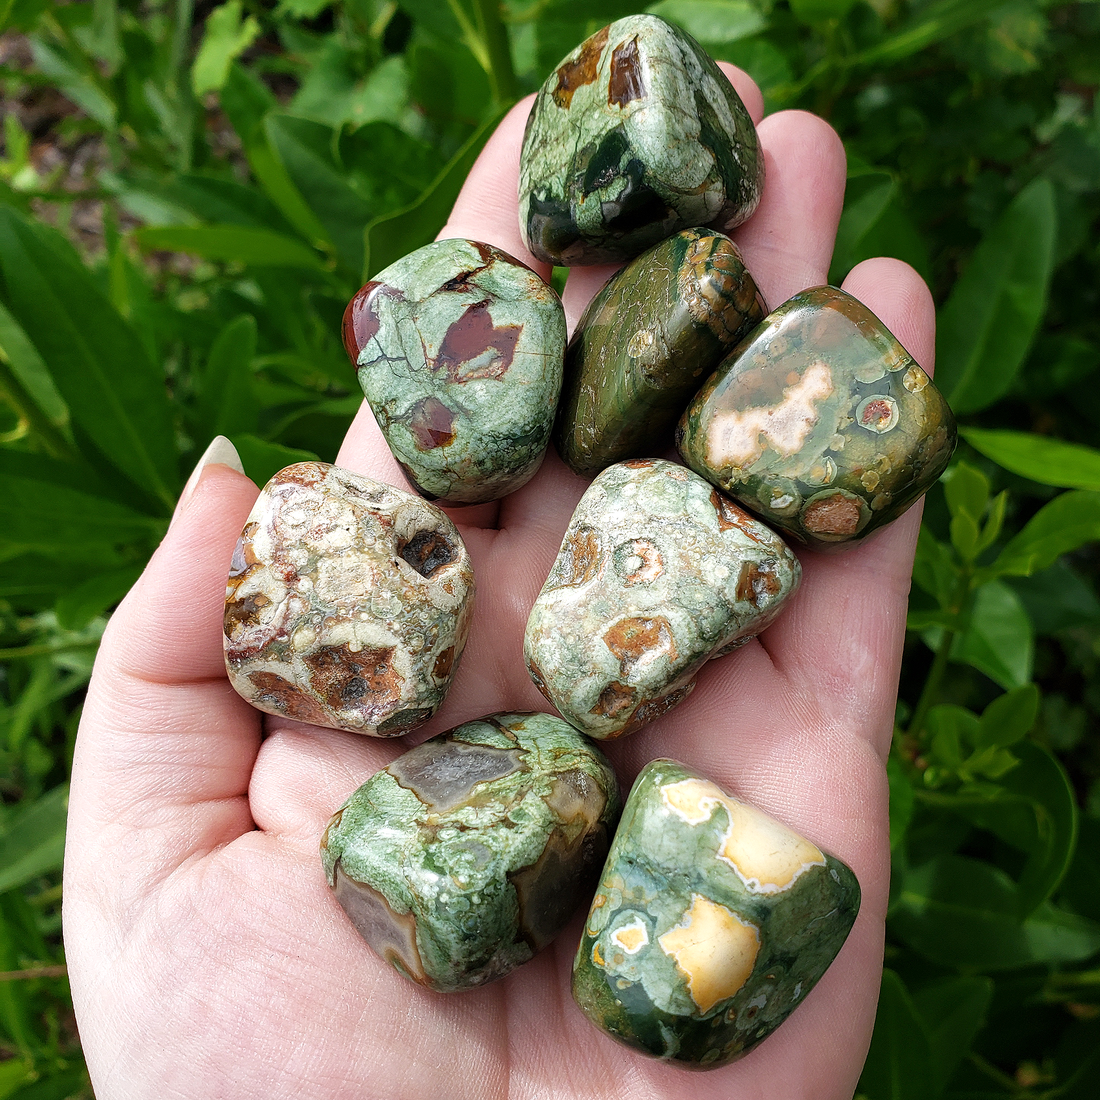 Green Rainforest Rhyolite Natural Tumbled Stone - One Stone - Outdoors